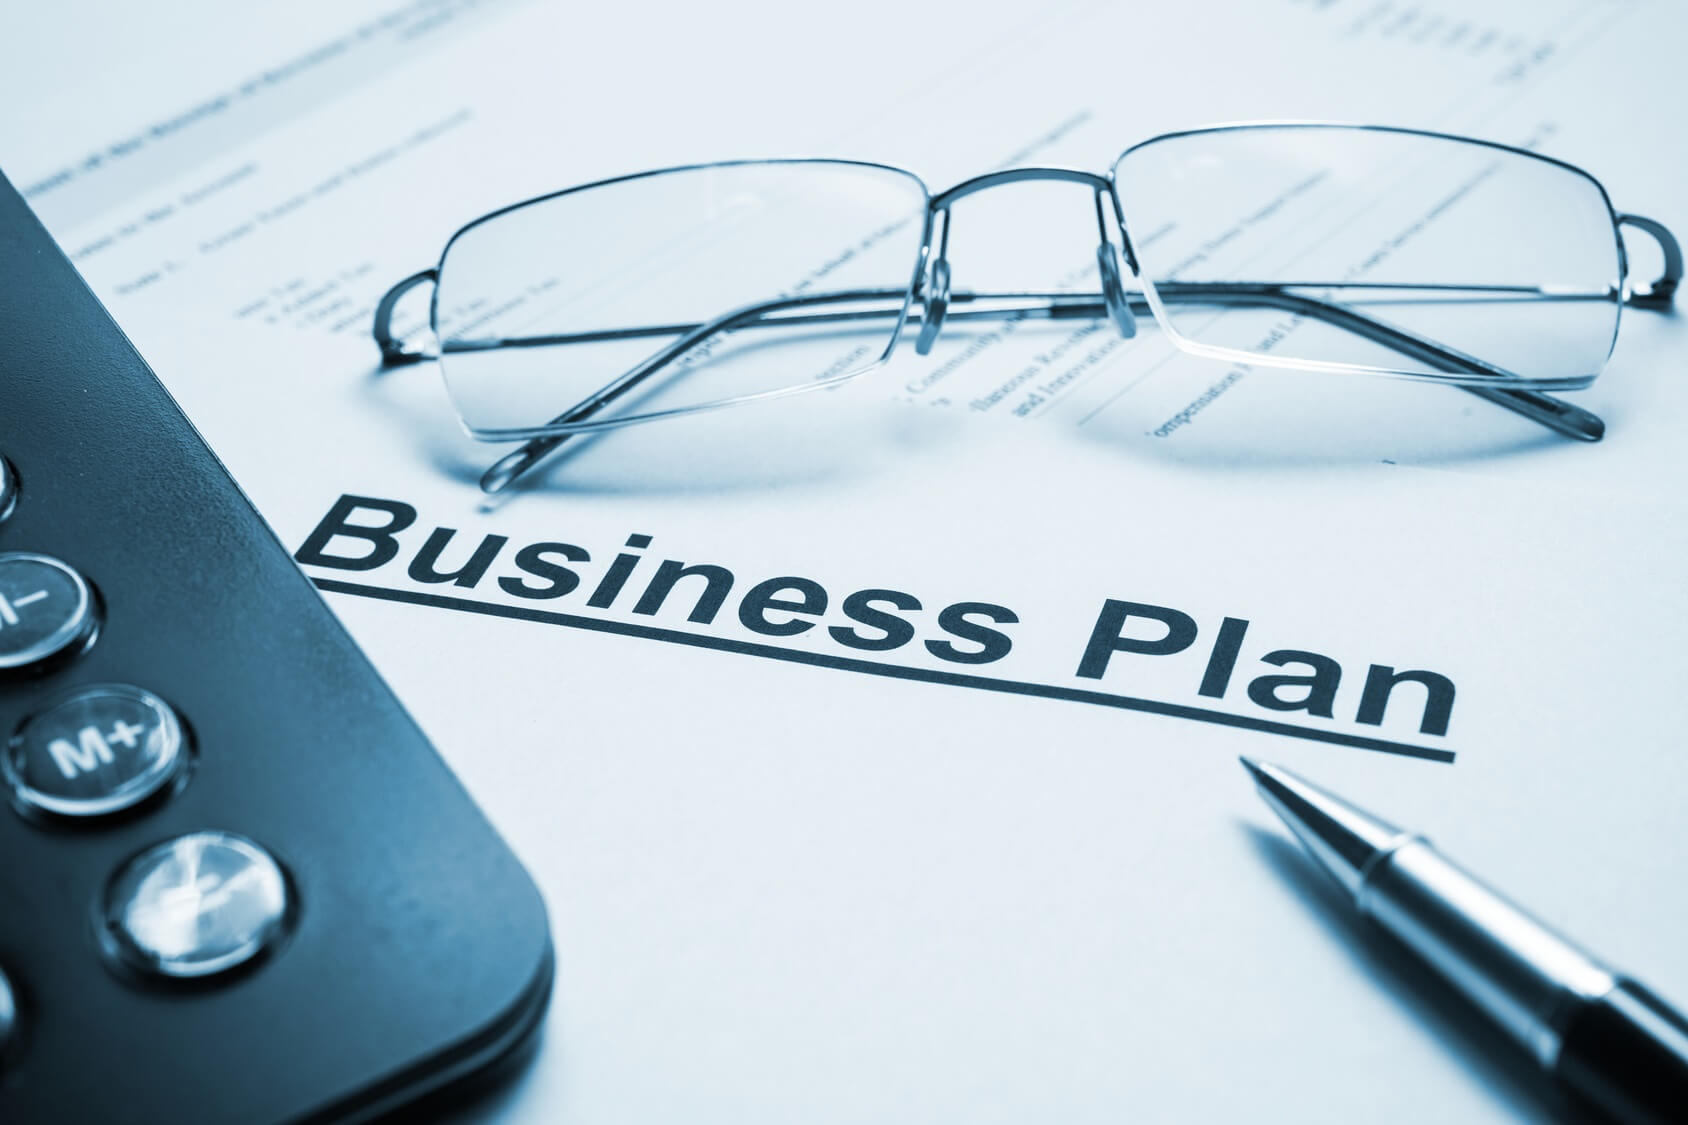 Which Two Documents Summarize the Business Plan of a Company